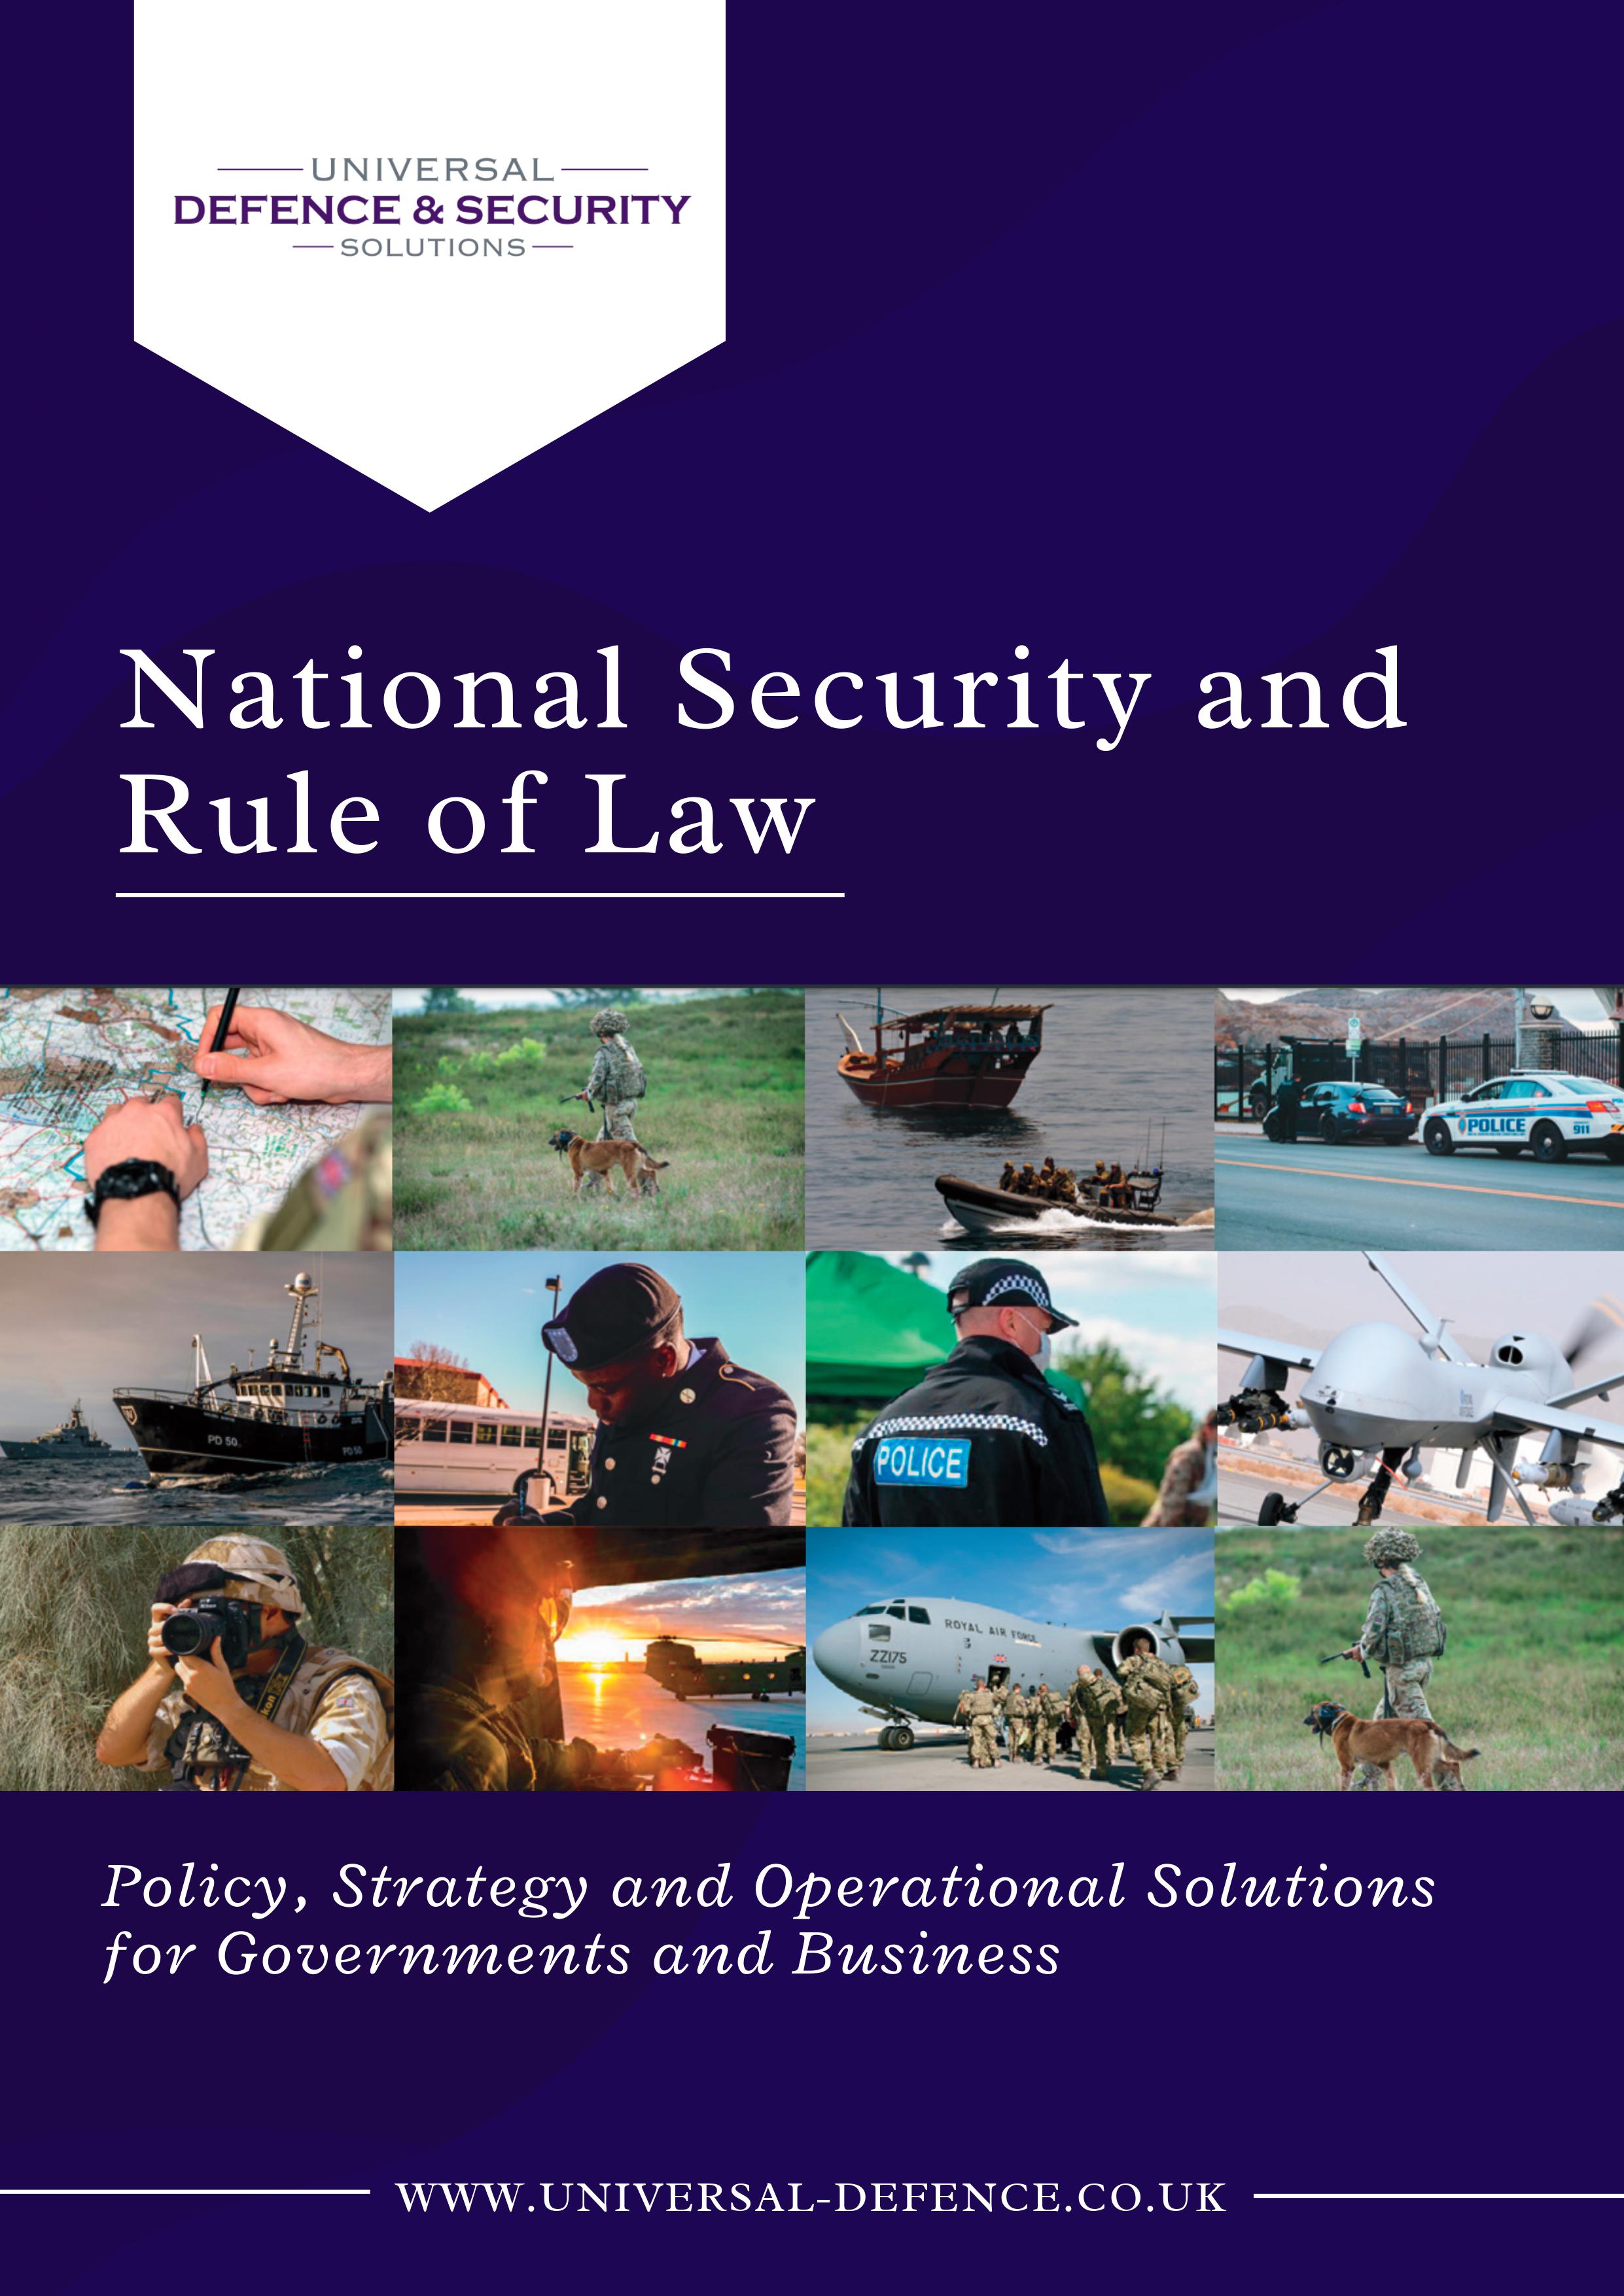 National Security and rule of law